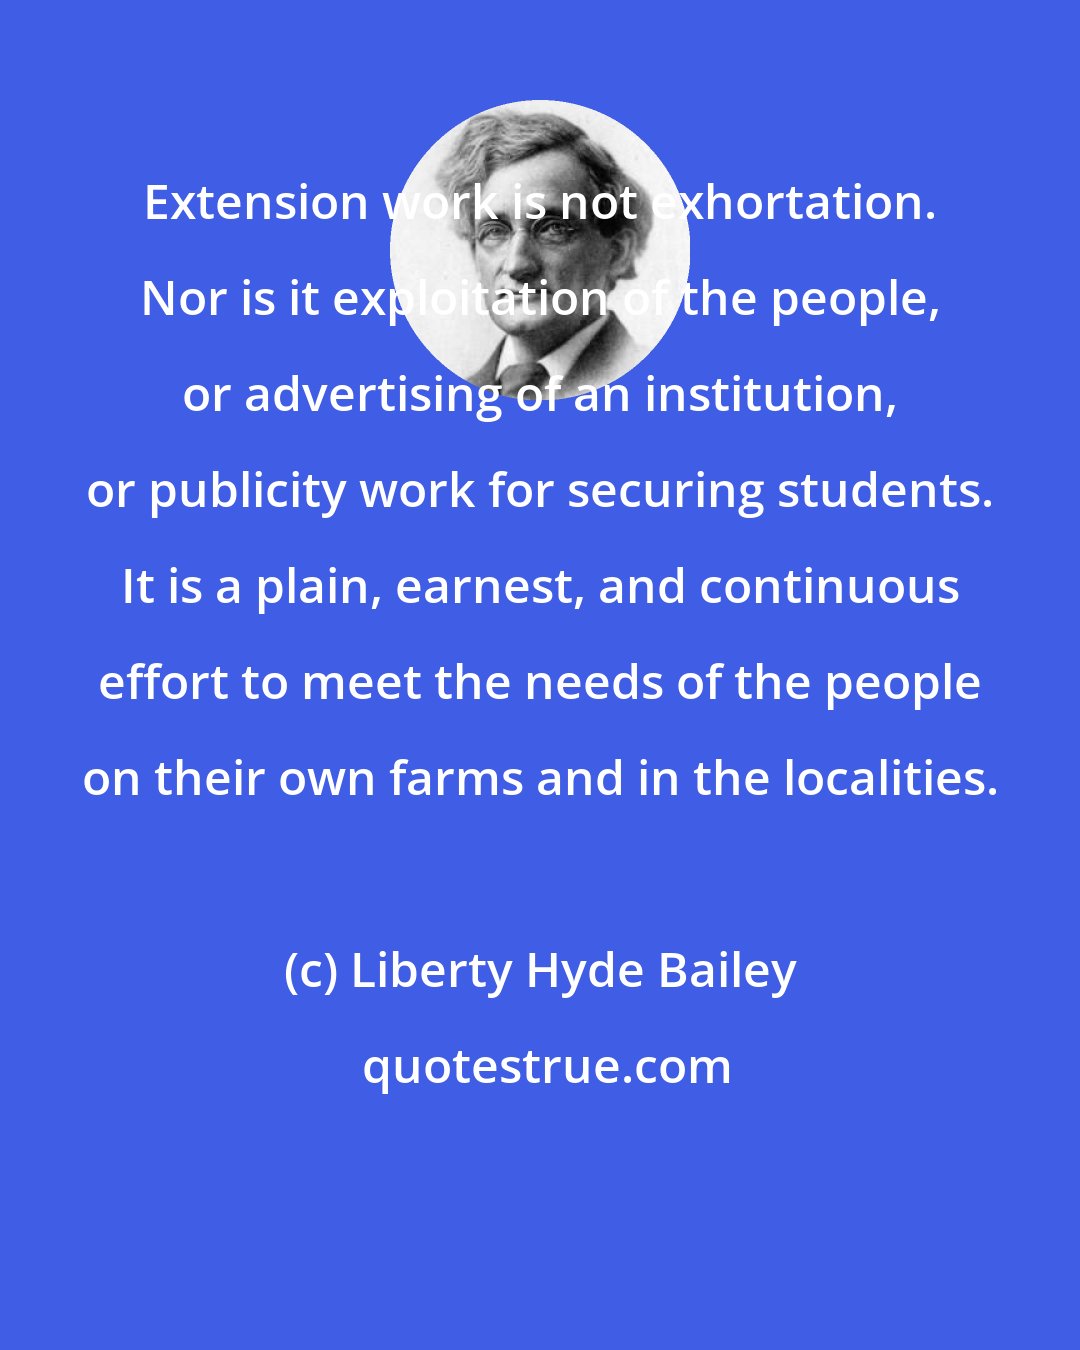 Liberty Hyde Bailey: Extension work is not exhortation. Nor is it exploitation of the people, or advertising of an institution, or publicity work for securing students. It is a plain, earnest, and continuous effort to meet the needs of the people on their own farms and in the localities.